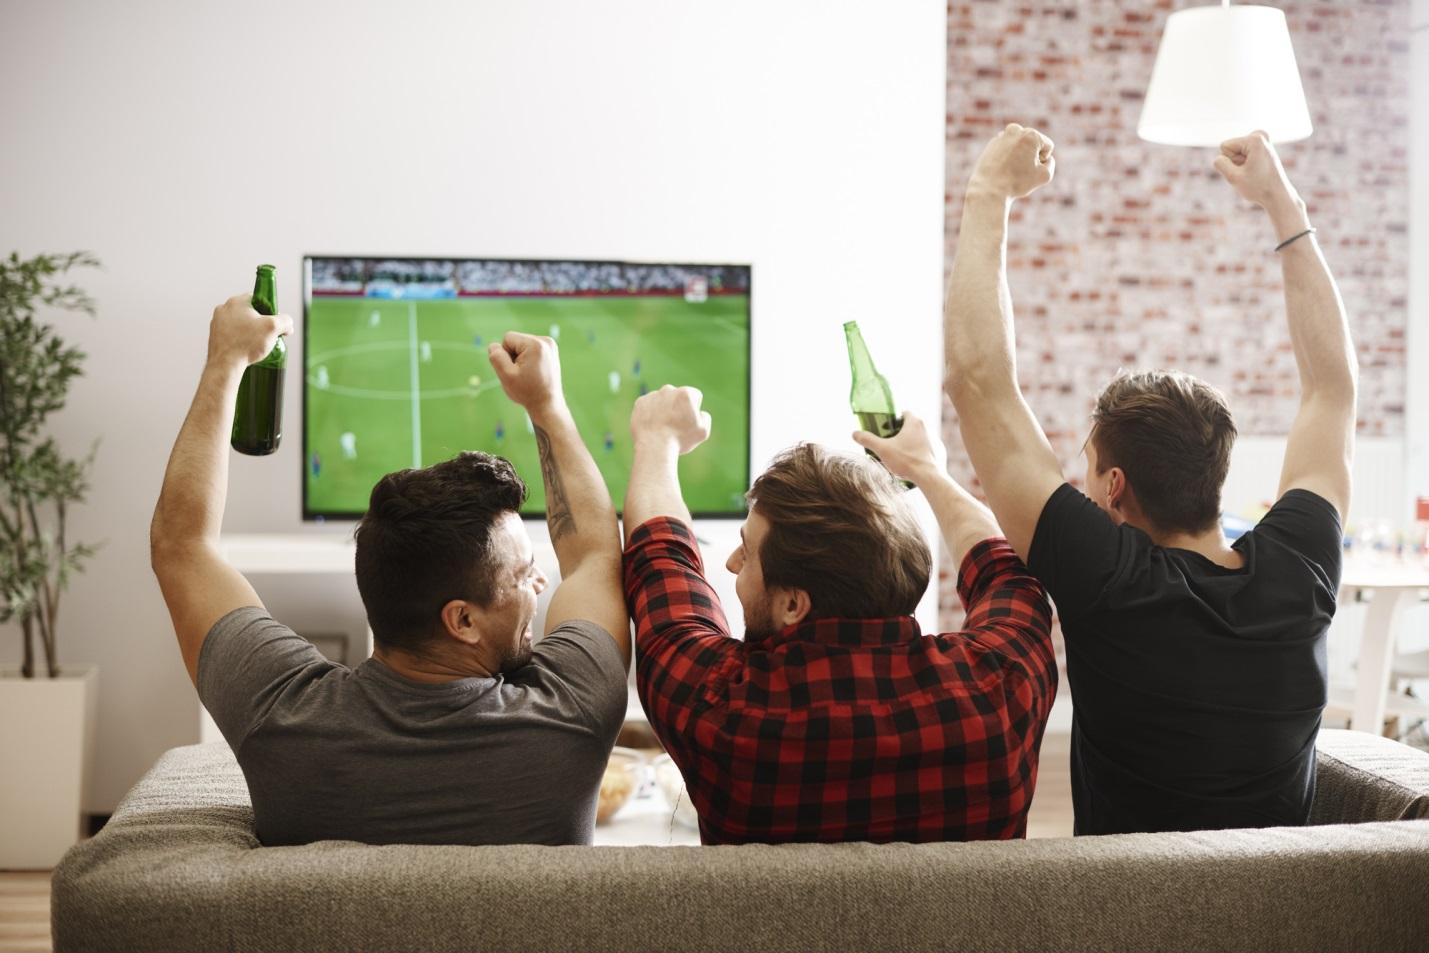 A group of friends watching a cool soccer game on tv.